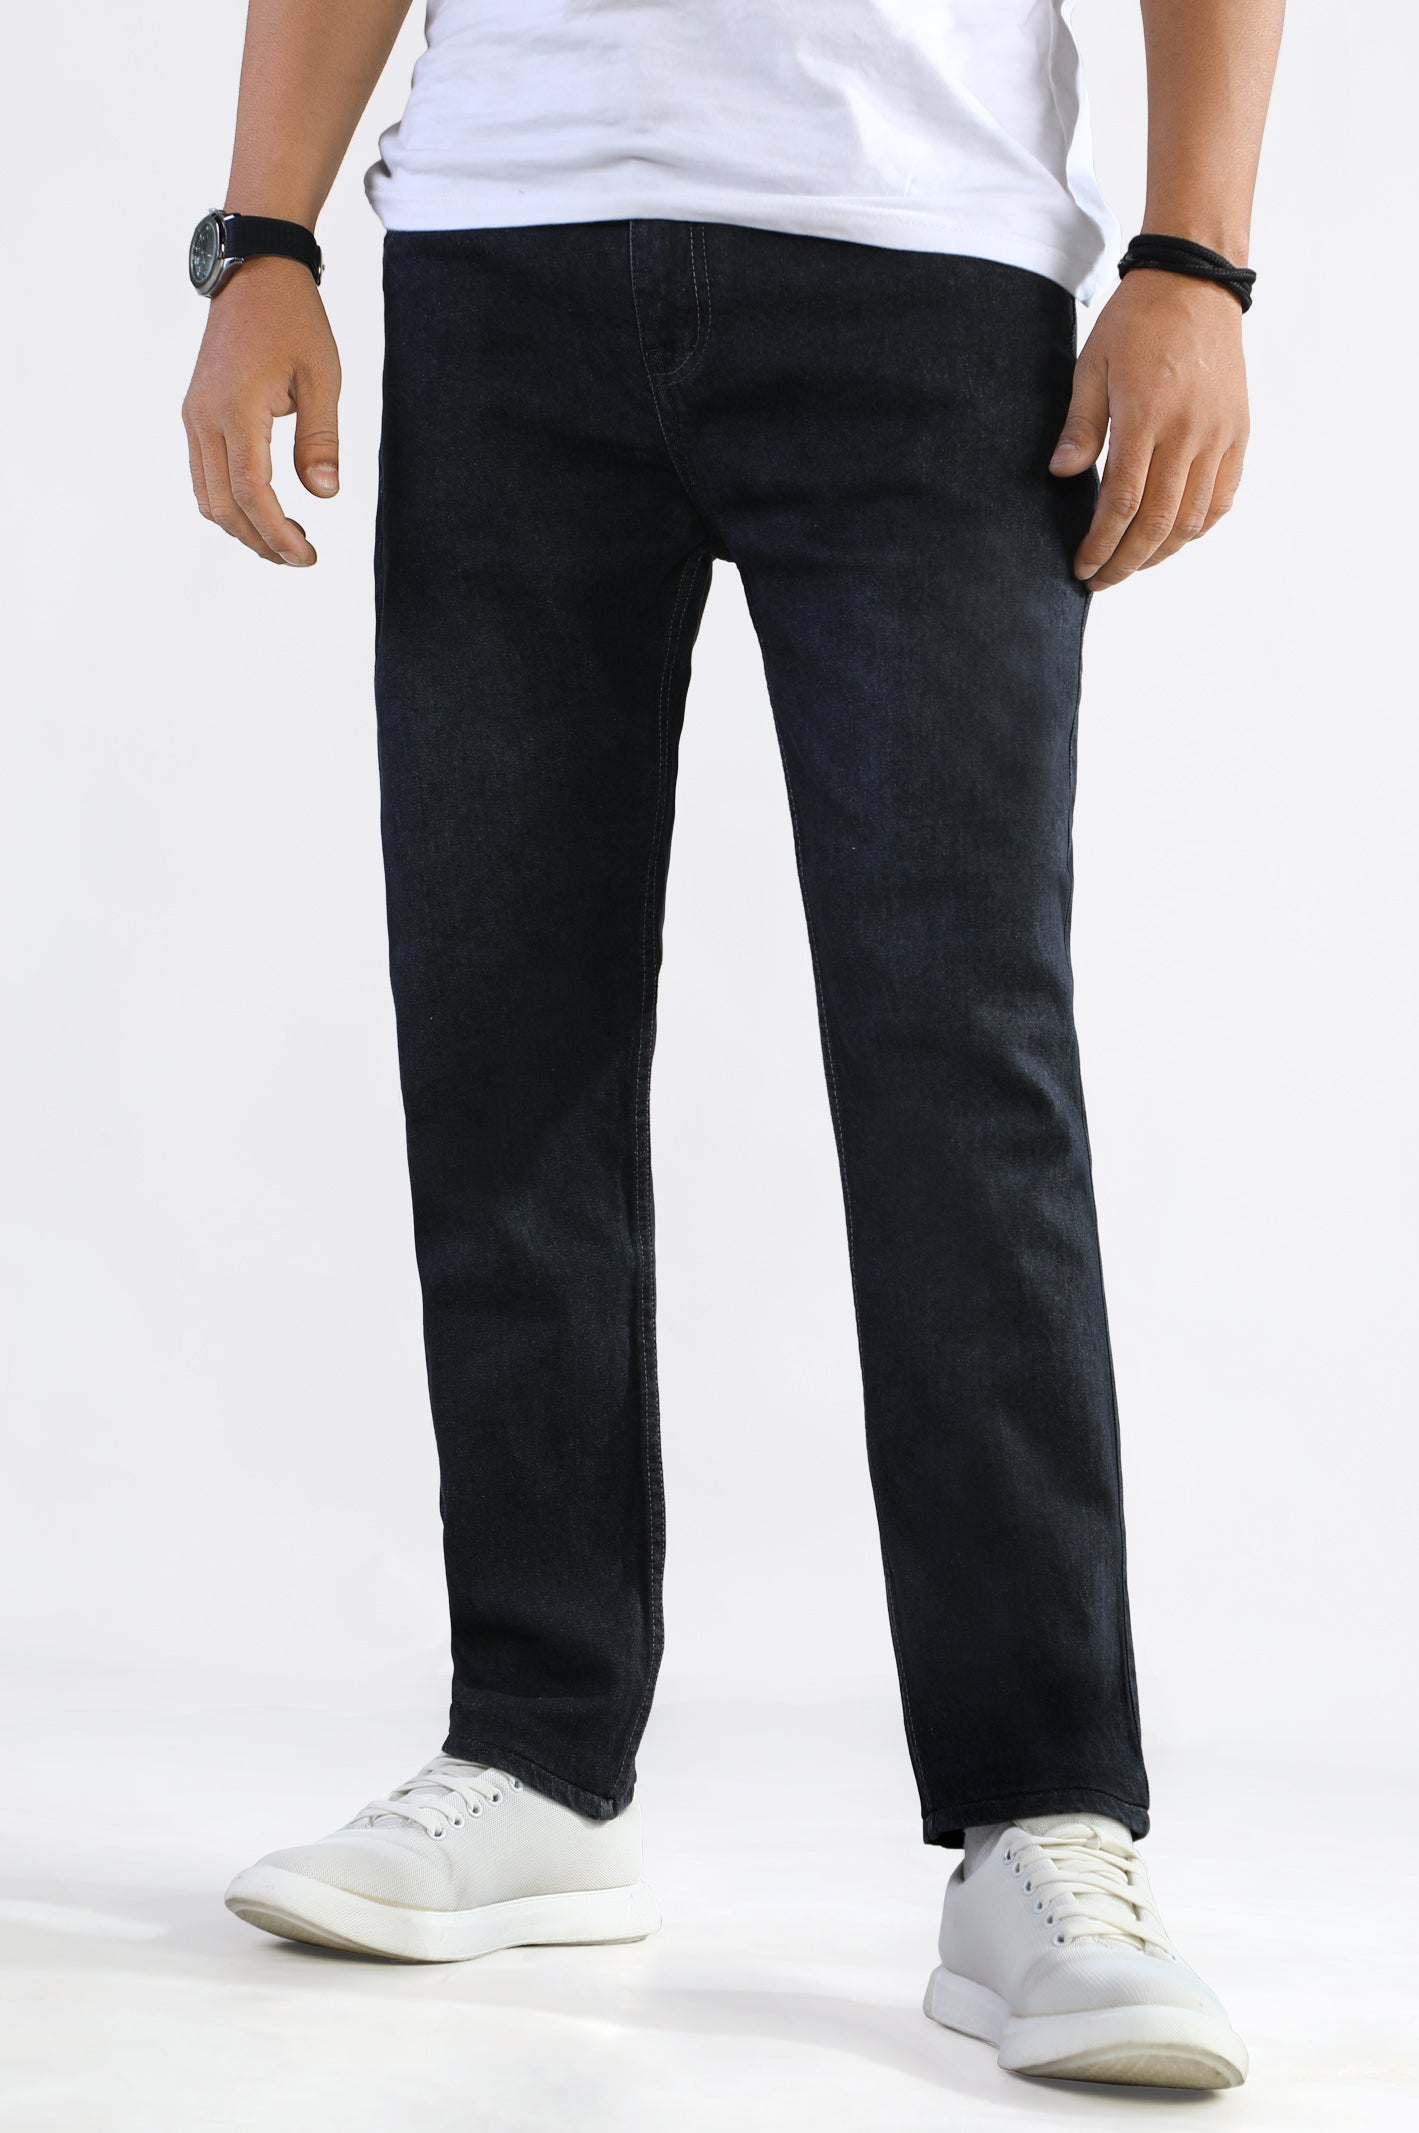 Grey Smart Fit Jeans - Diners